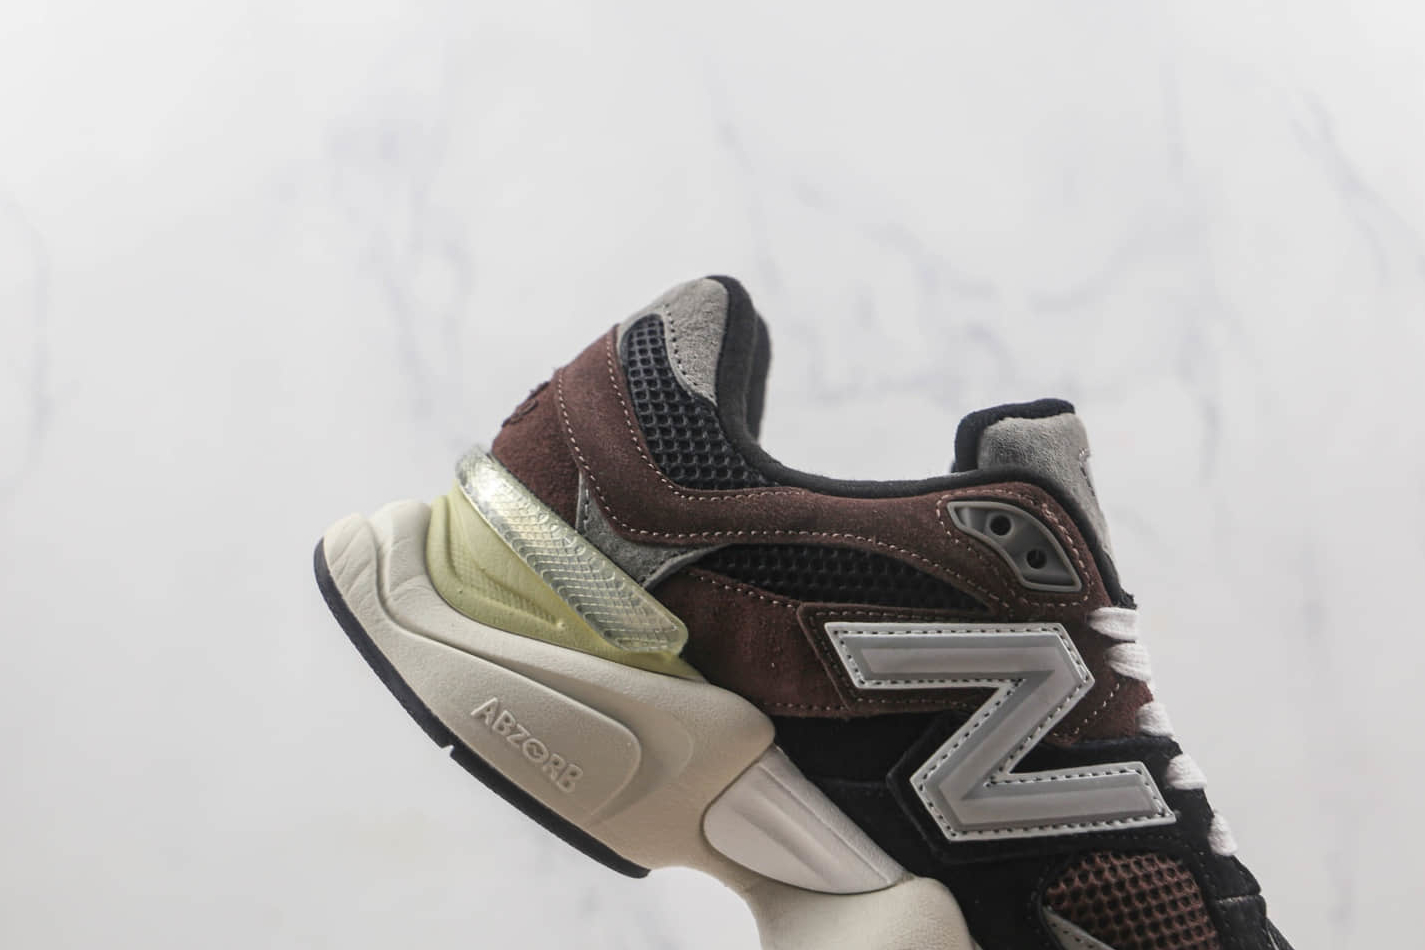 New Balance 9060 Brown Black - Classic Style and Comfort